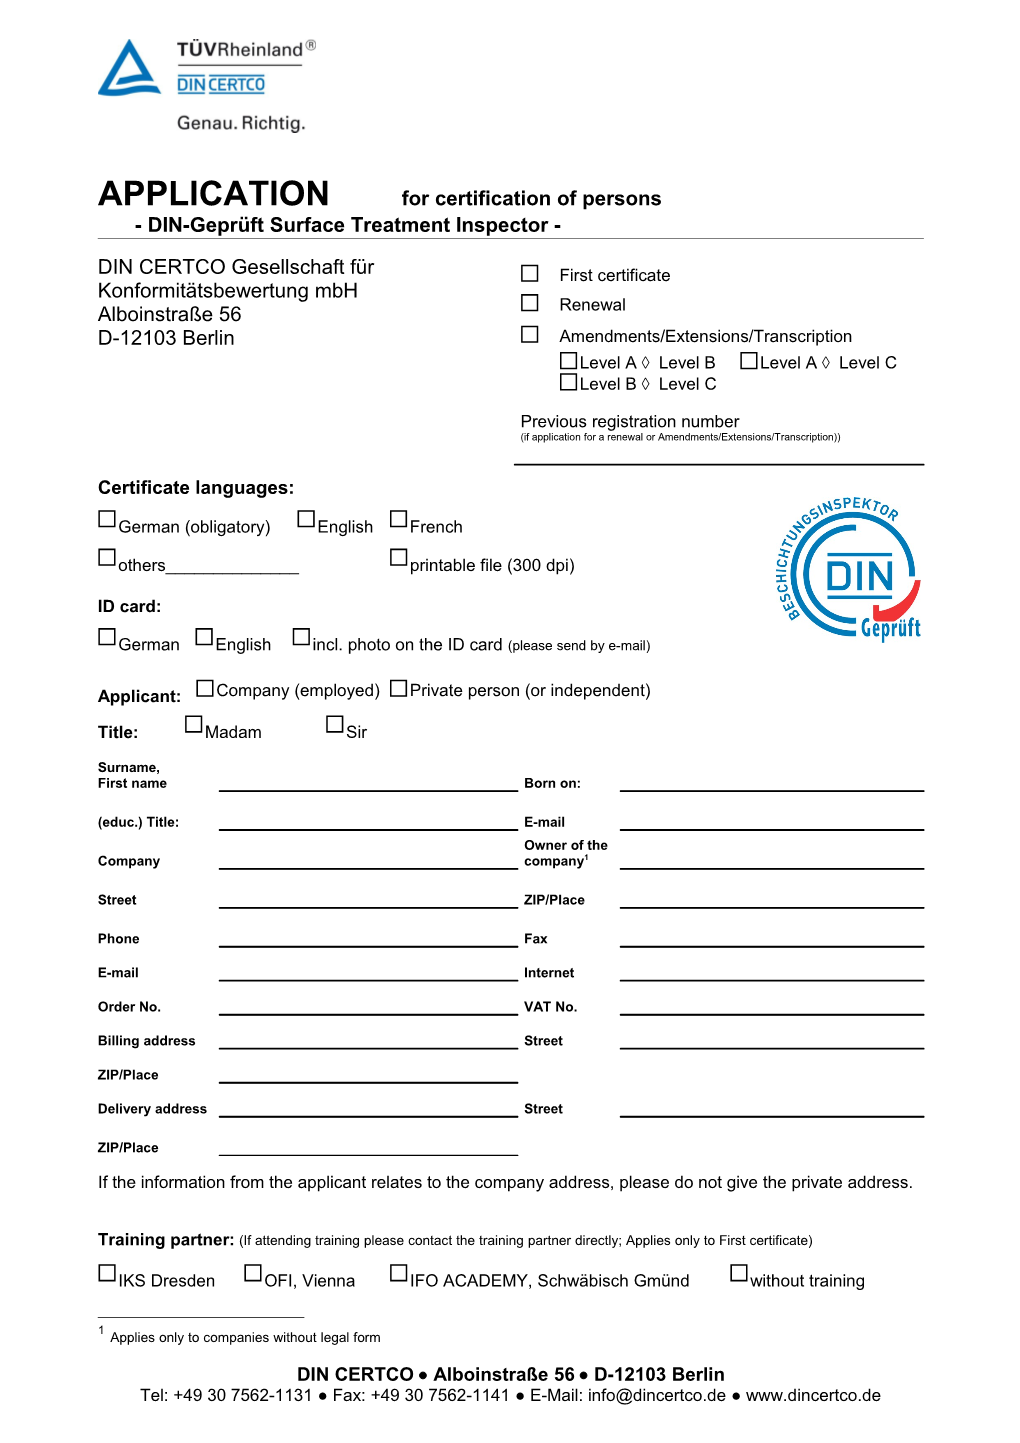 Application for Certification of Person DIN-Geprüftsurface Treatment Inspector Page1 Of2